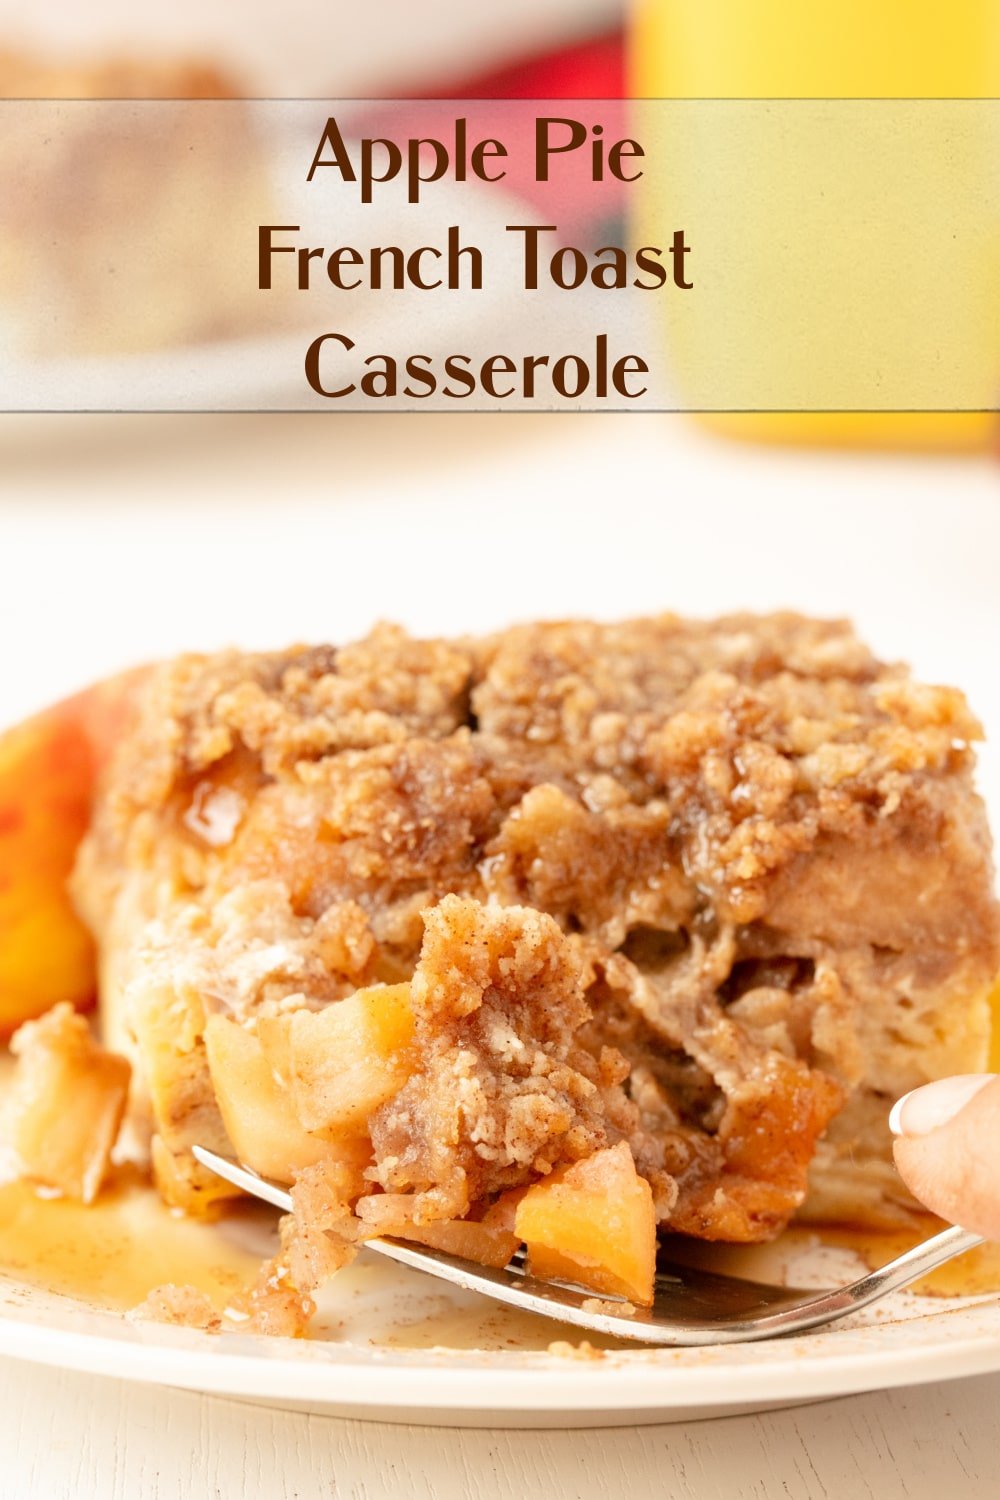 If you're looking for a delicious, but low-effort weekend breakfast or a make-ahead quick treat for school or a busy work day, this apple pie French toast bake is for you. via @cmpollak1